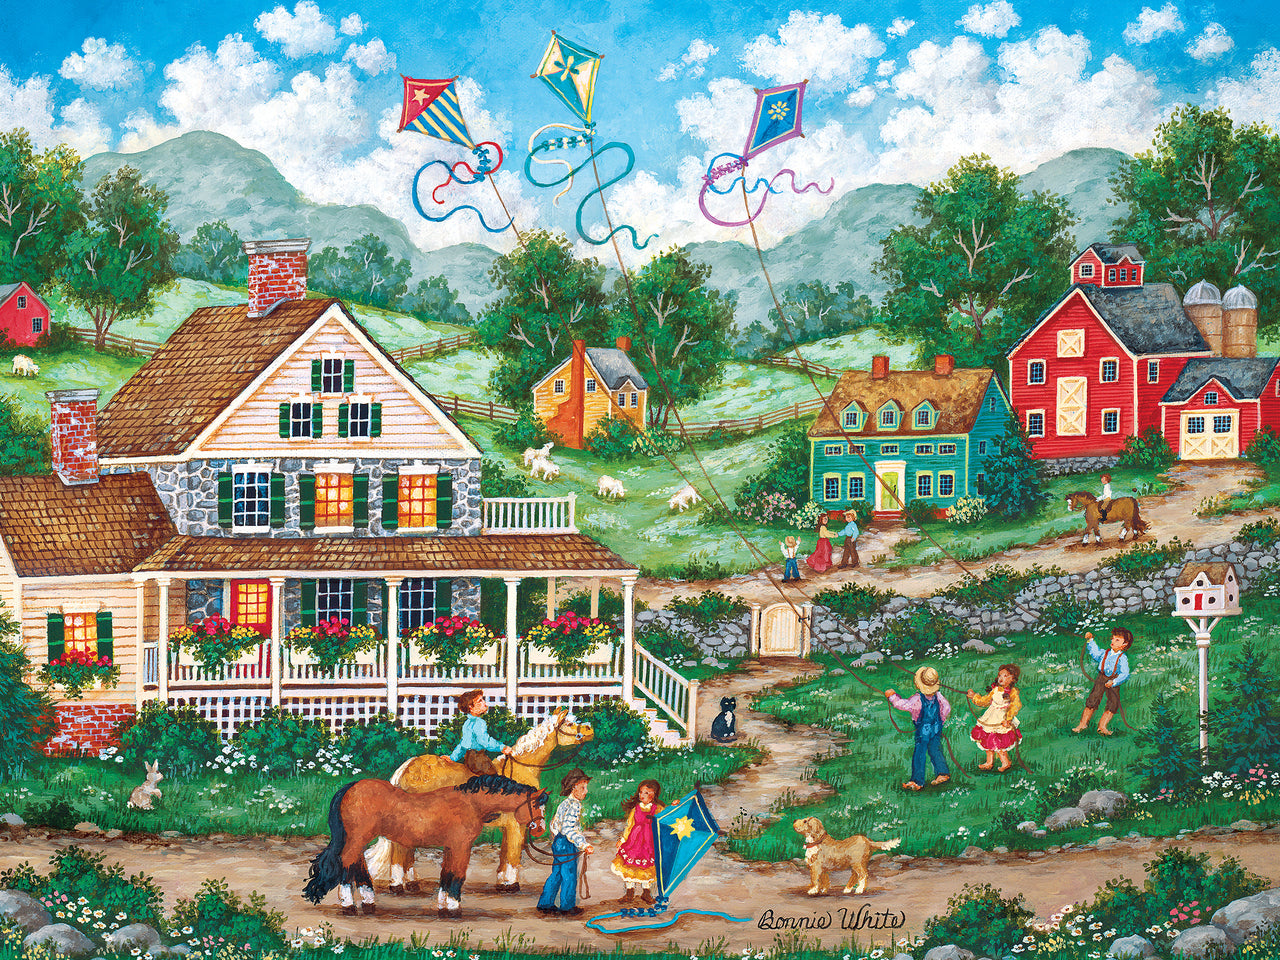 Heartland Collection Crosswinds - 550 Piece Jigsaw Puzzle by Masterpieces